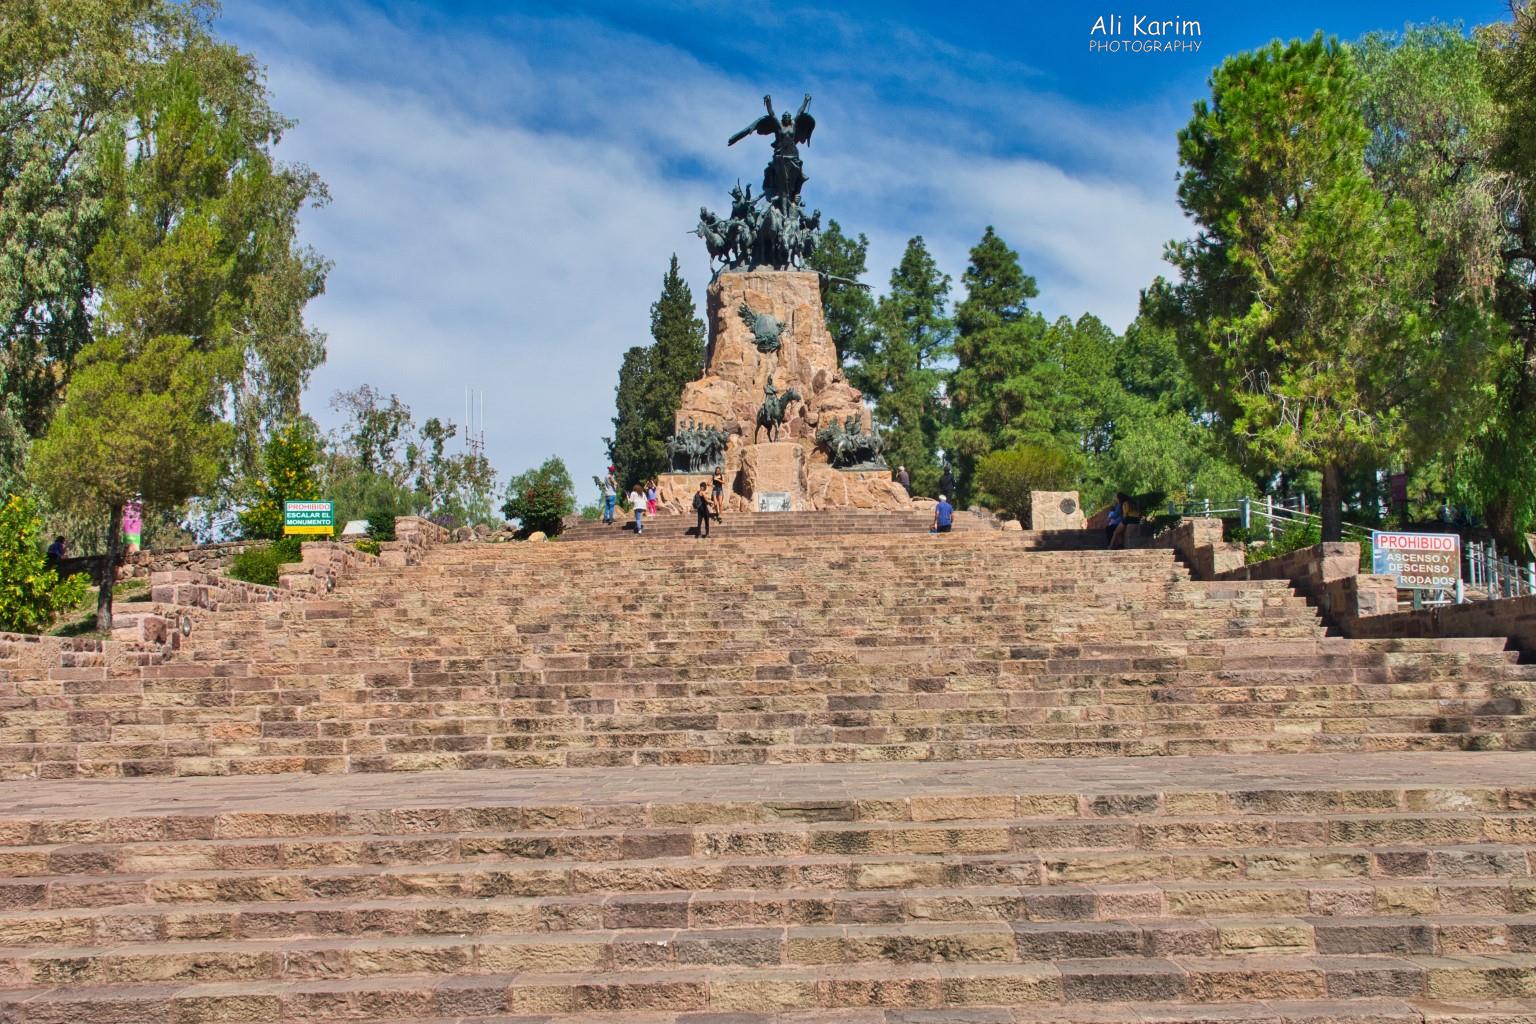 More Mendoza, Argentina At one end of the Parque is a hill called Cerro de la Gloria, with a huge memorial to the Army of the Andes at the top